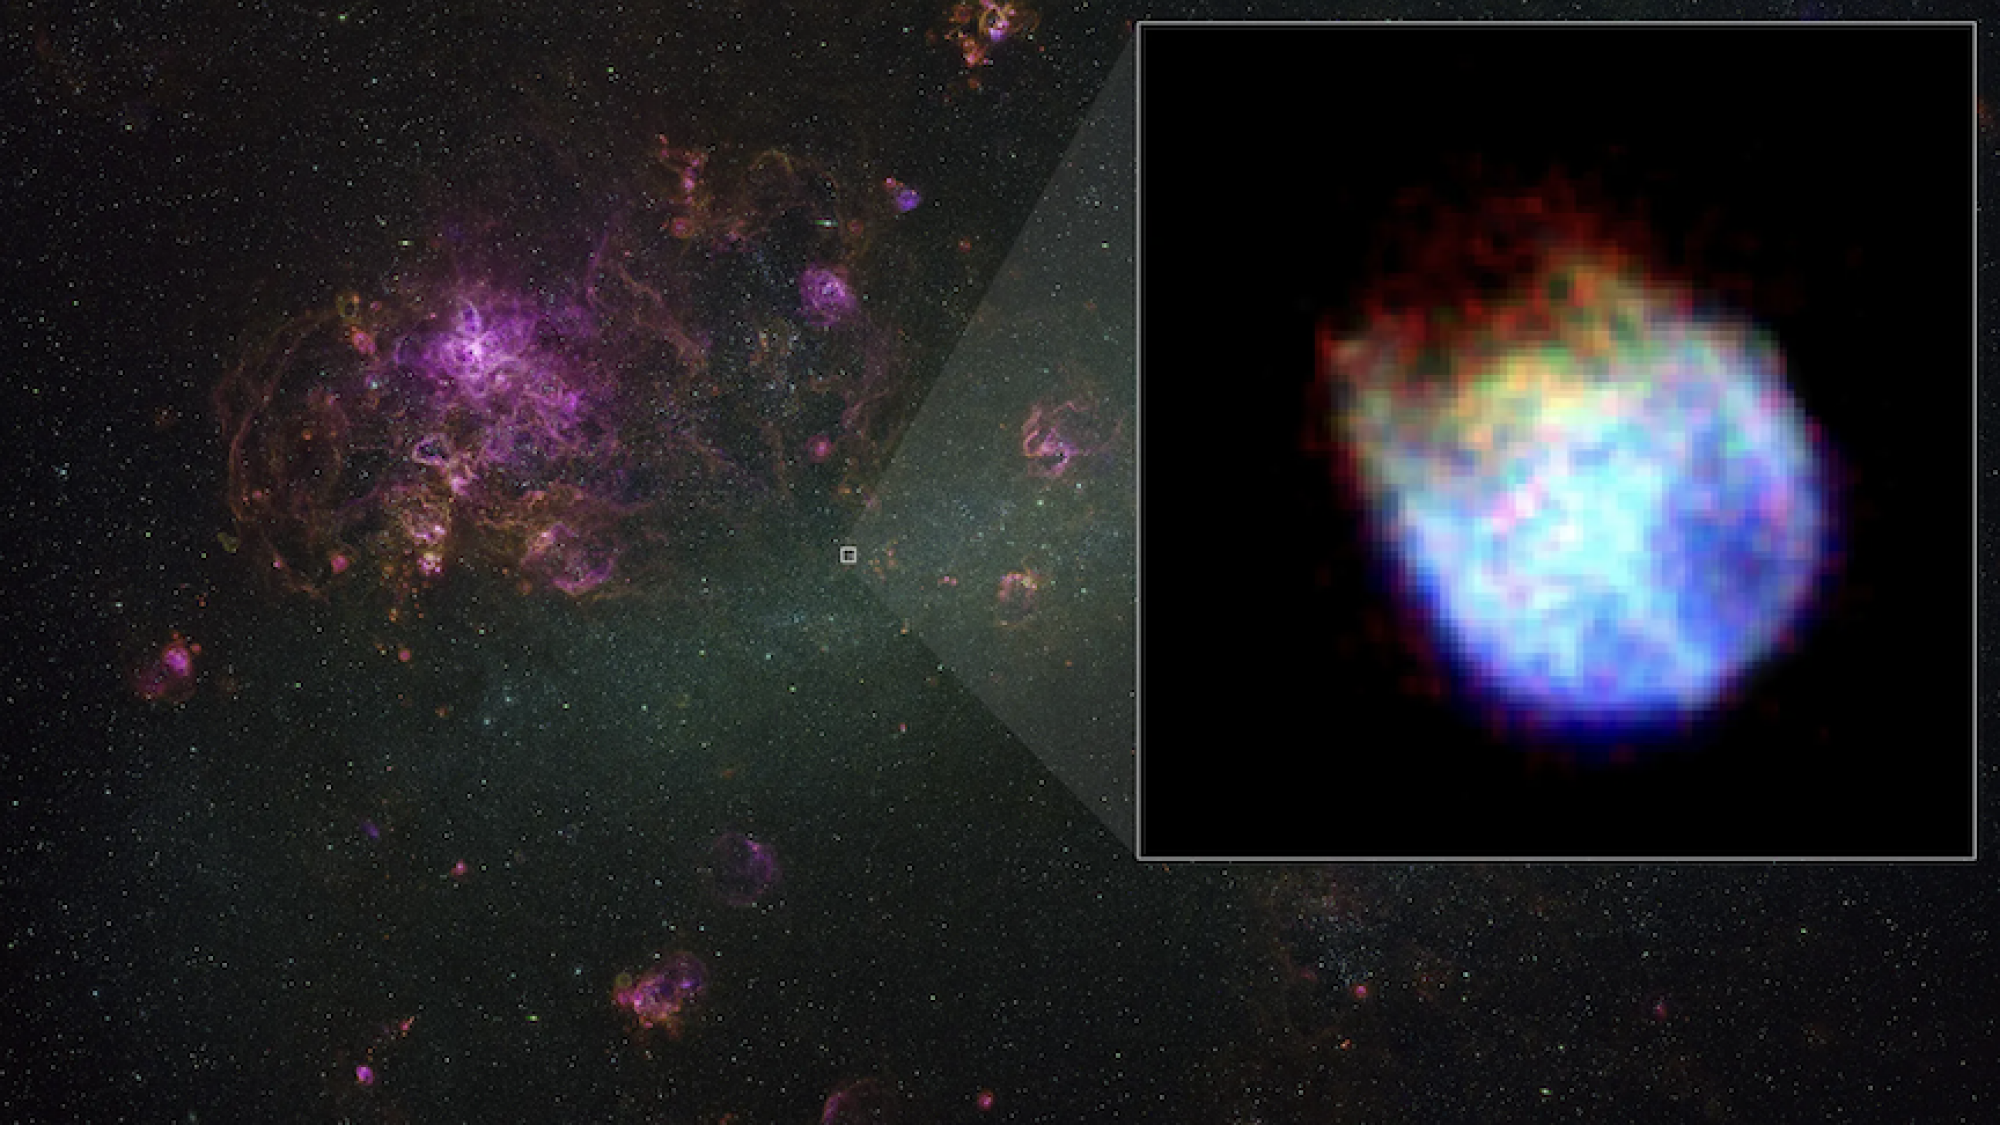 The inset on right shows a close-up of supernova remnant N132D.